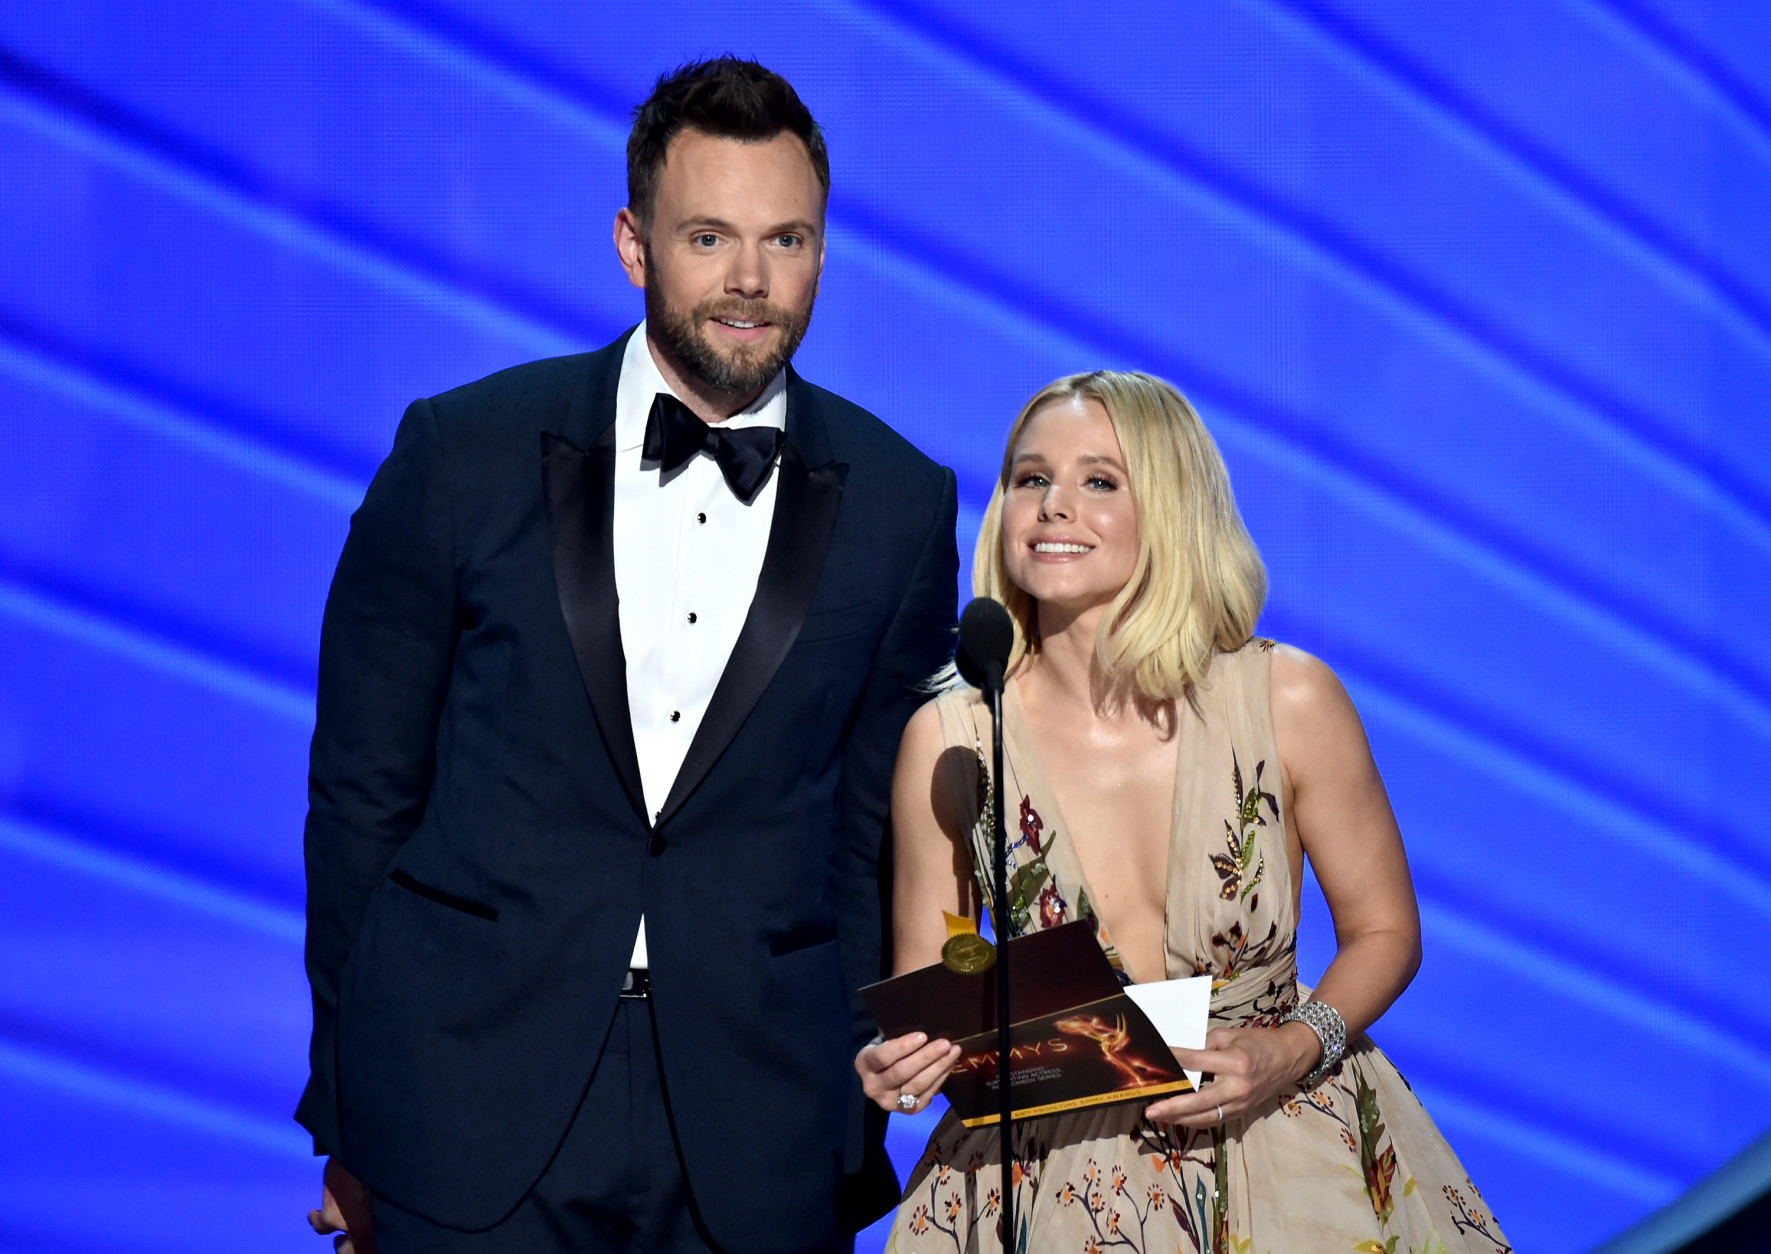 Joel McHale, left, and Kristen Bell present the award for outstanding supporting actress in a comedy series at the 68th Primetime Emmy Awards on Sunday, Sept. 18, 2016, at the Microsoft Theater in Los Angeles. (Photo by Vince Bucci/Invision for the Television Academy/AP Images)